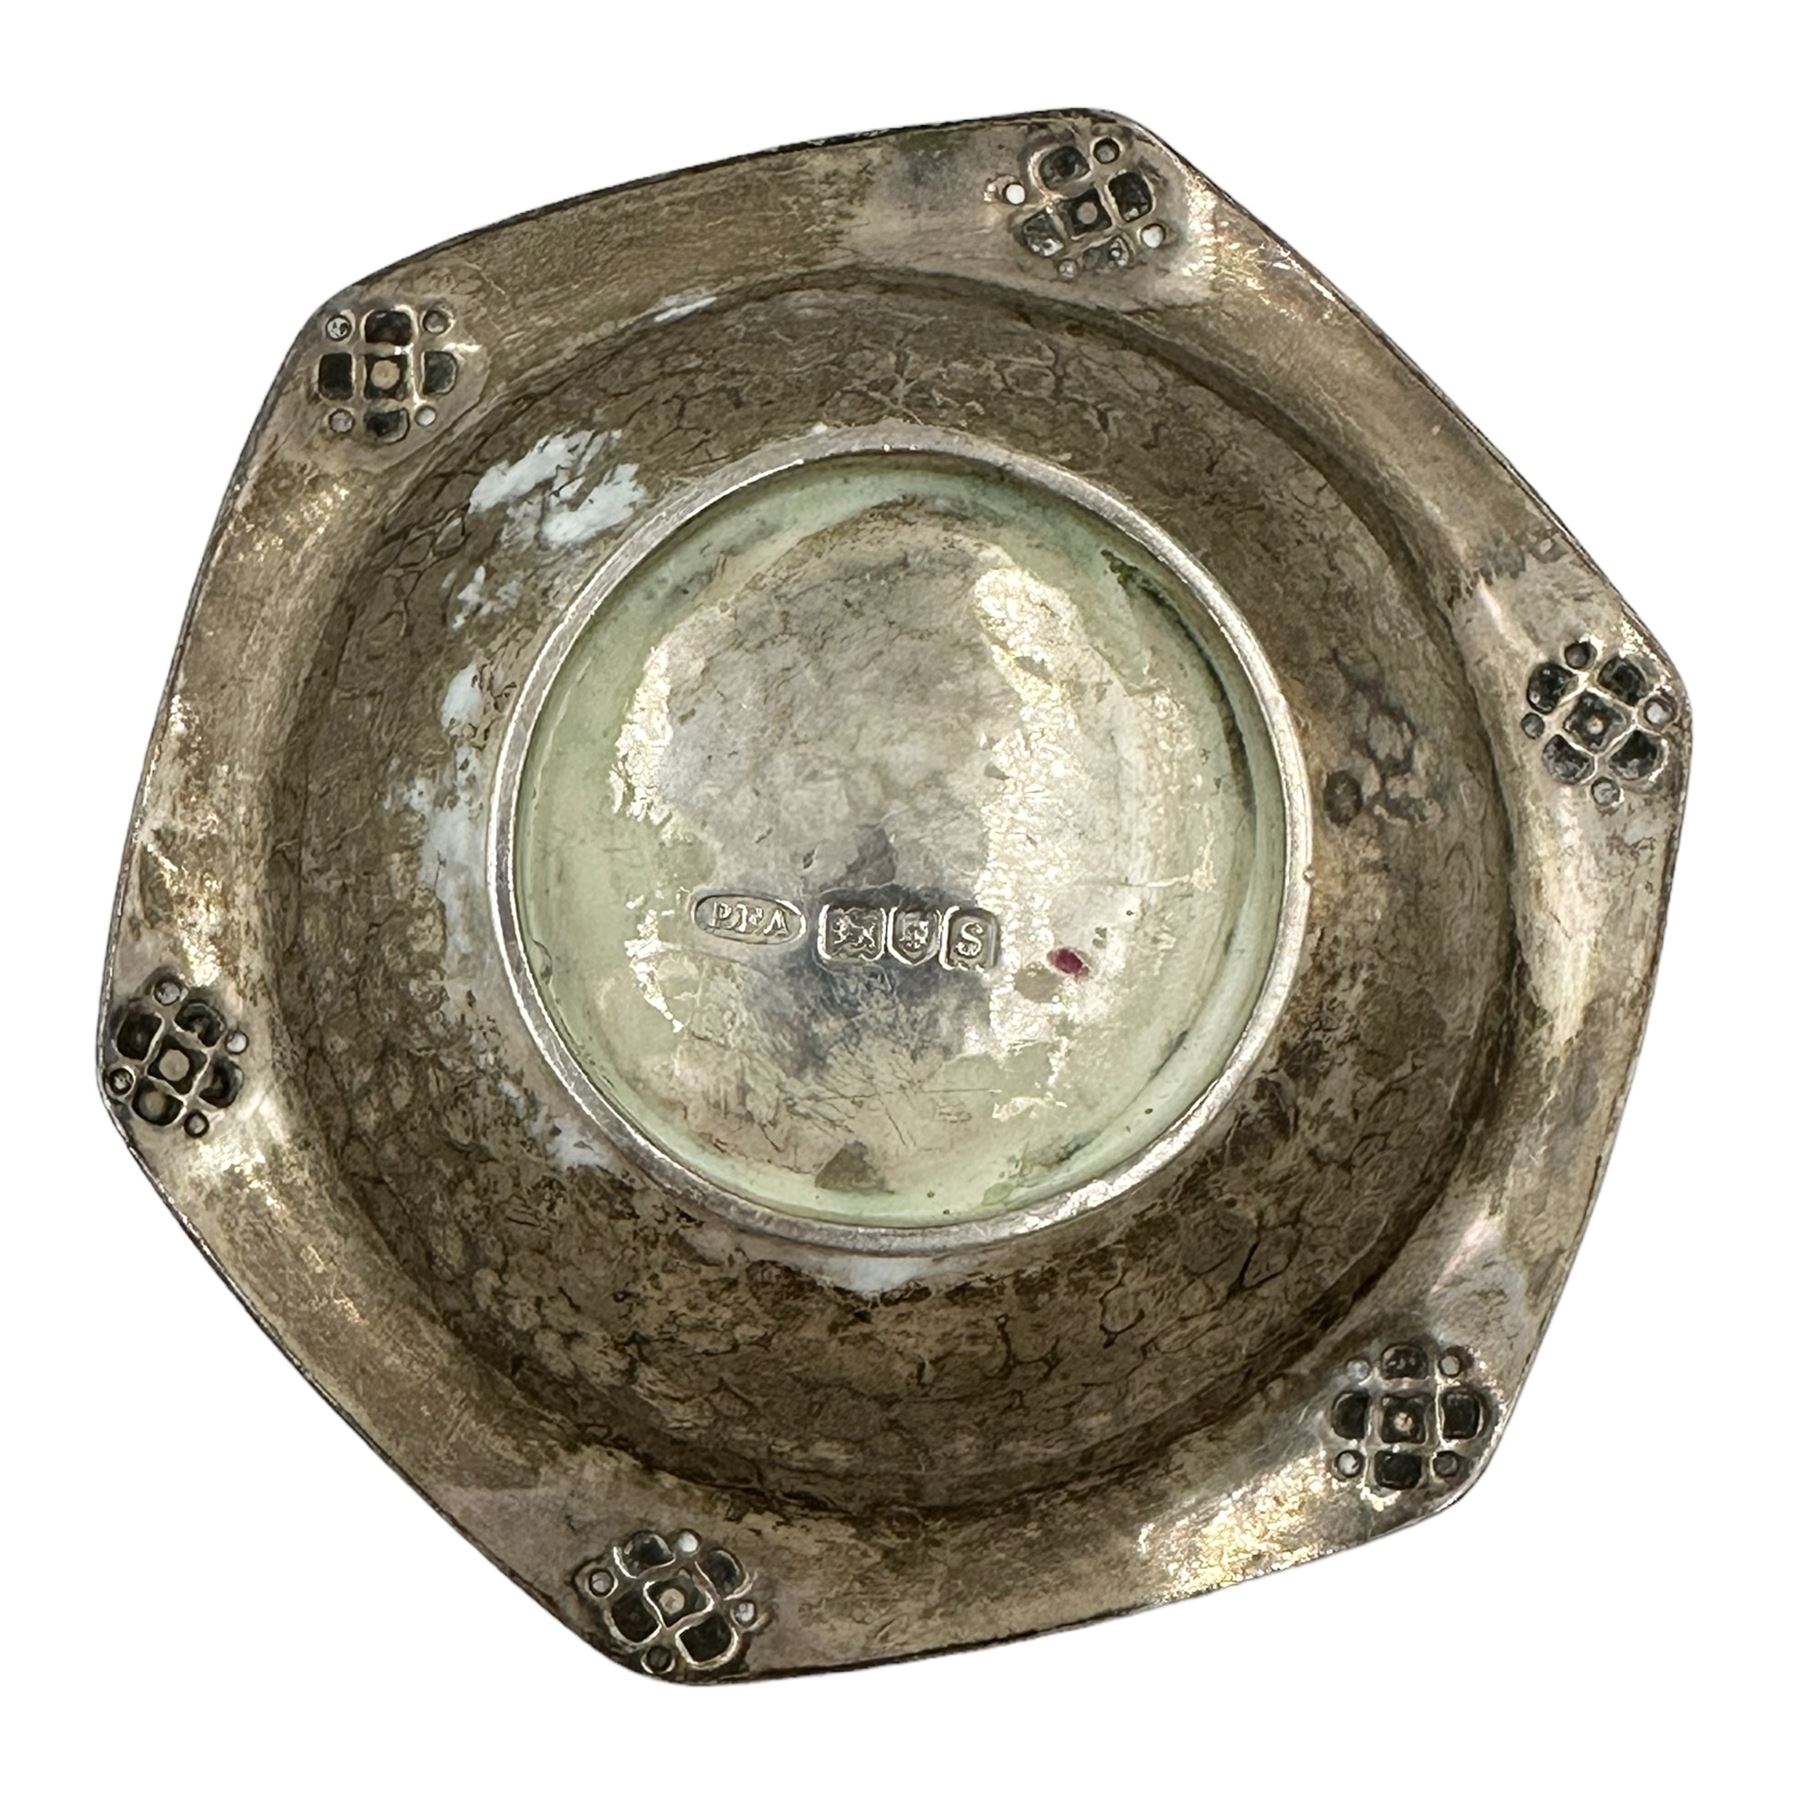 Hammered silver Arts and Crafts hexagonal dish decorated with raspberry prunts W8cm London 1913 Make - Image 3 of 4